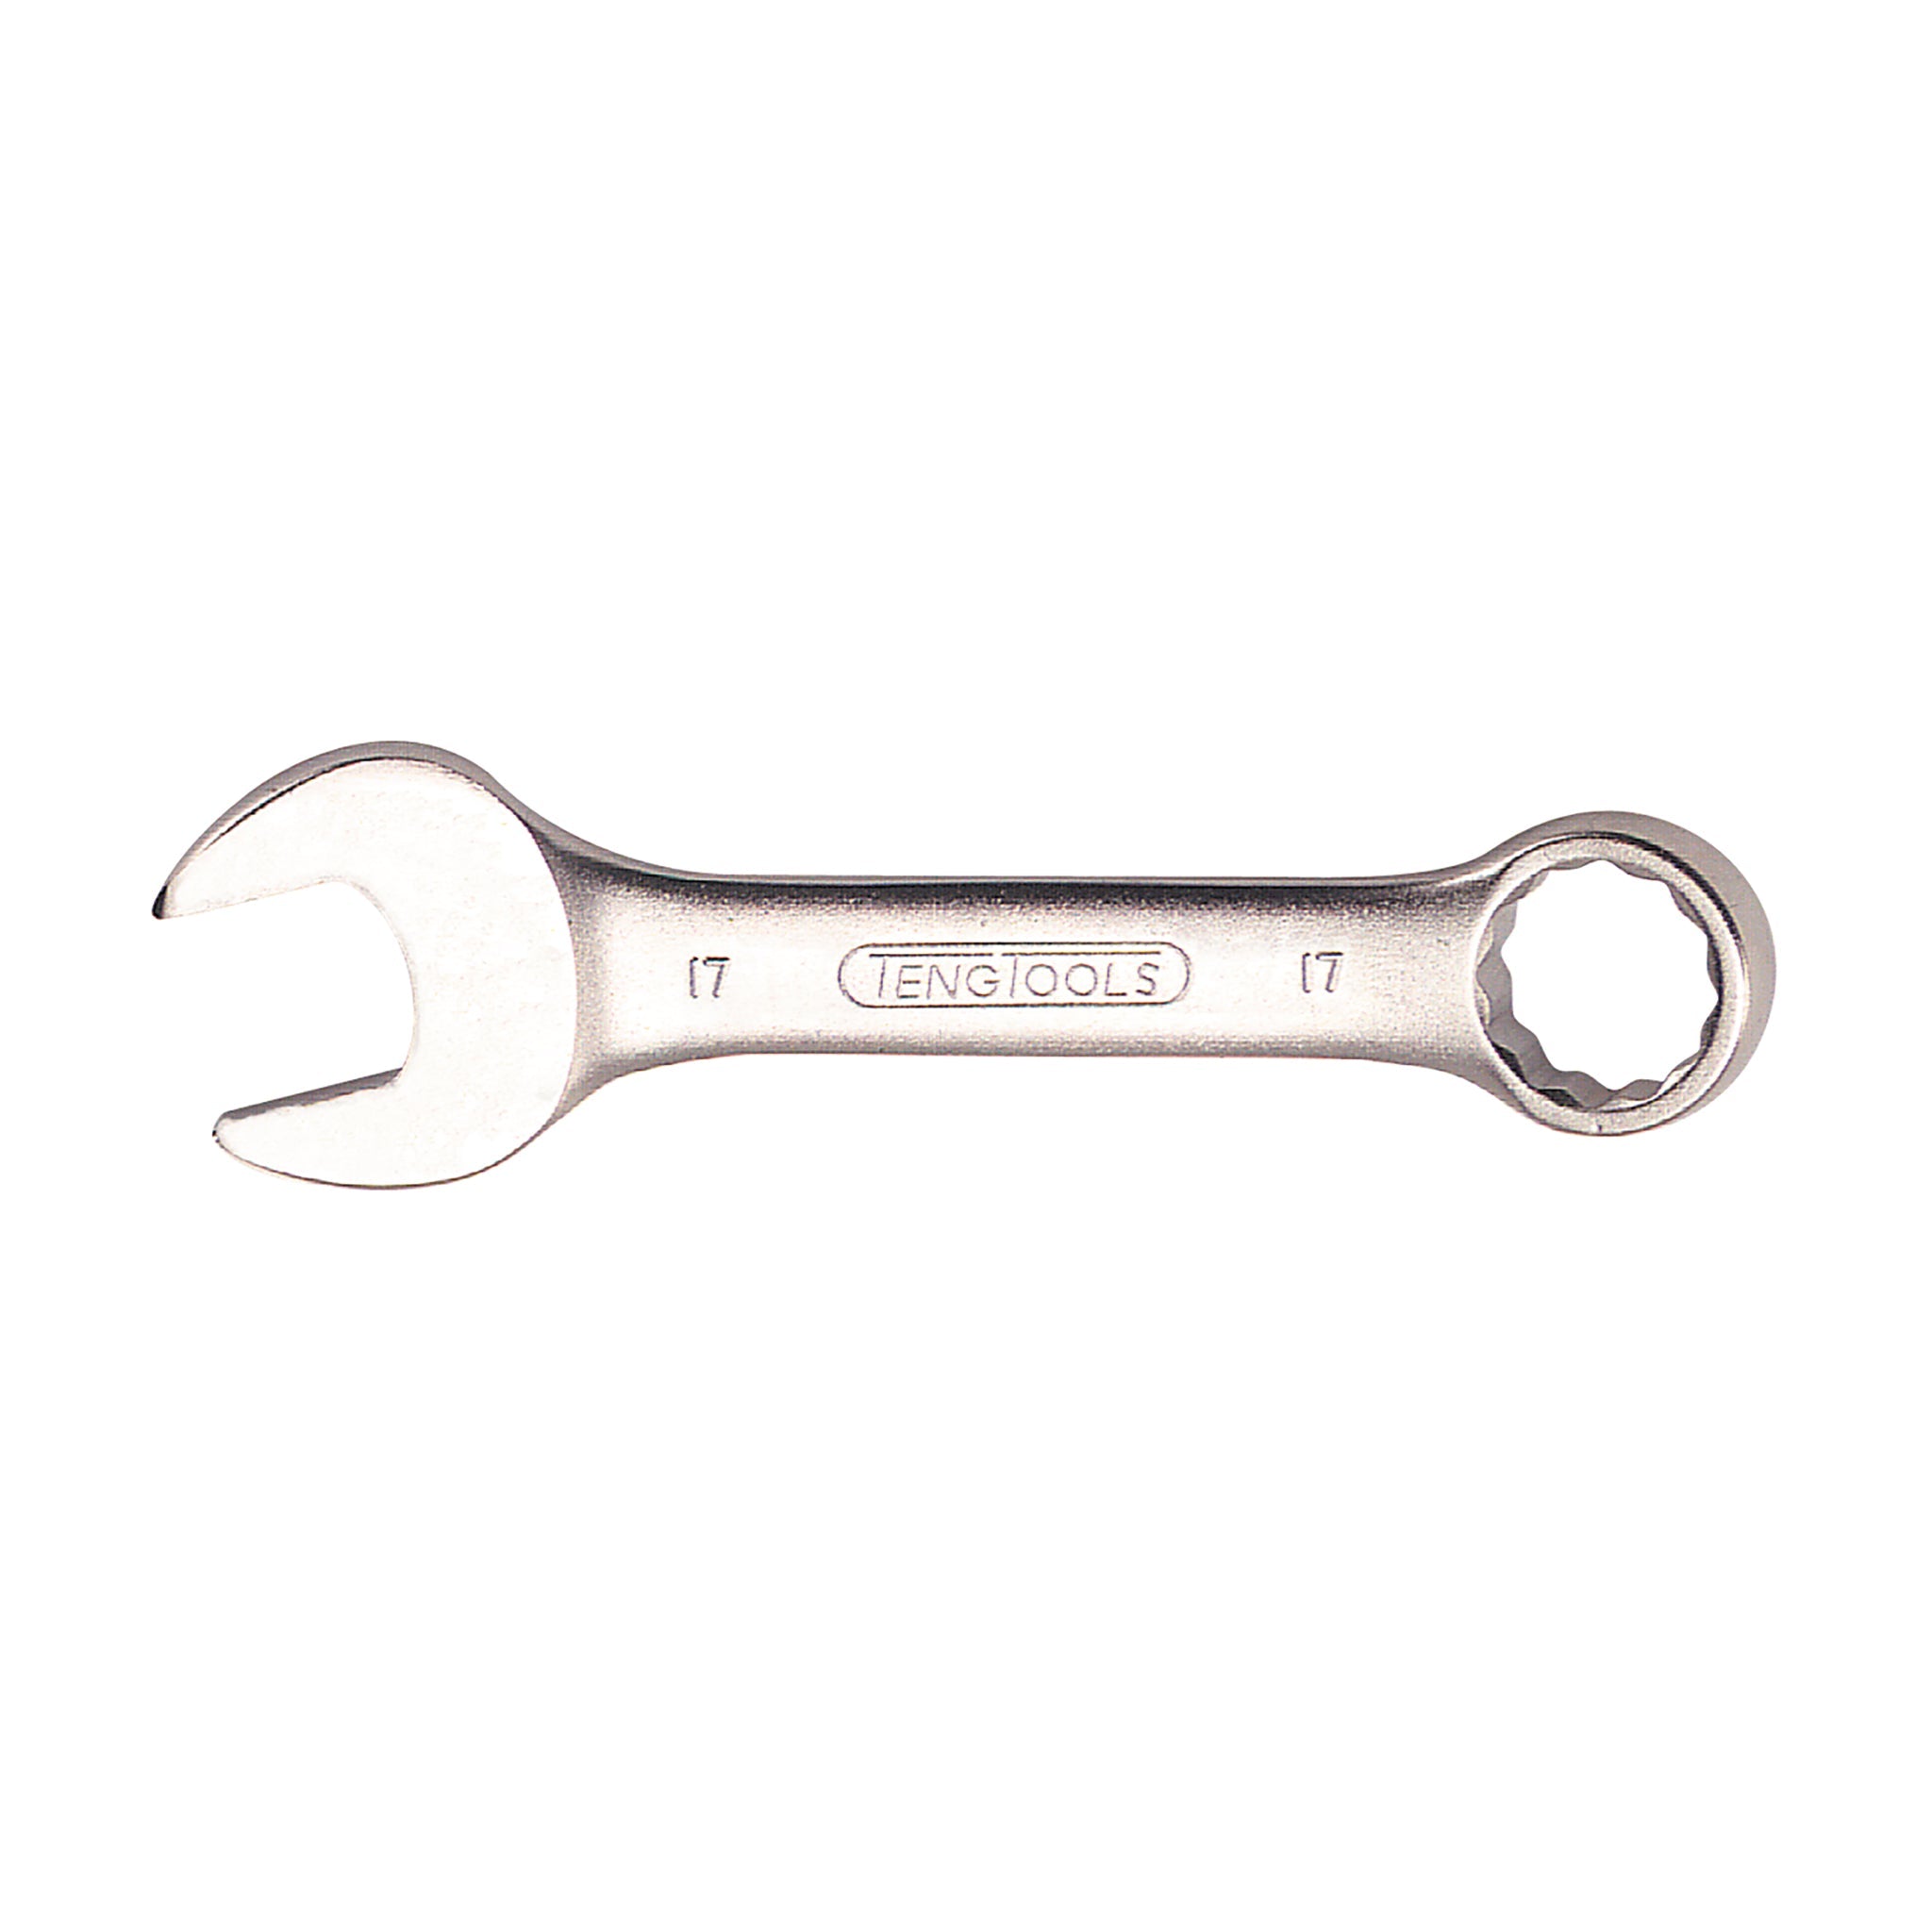 Teng Tools Mini/Small Metric Combination Wrenches - 17mm